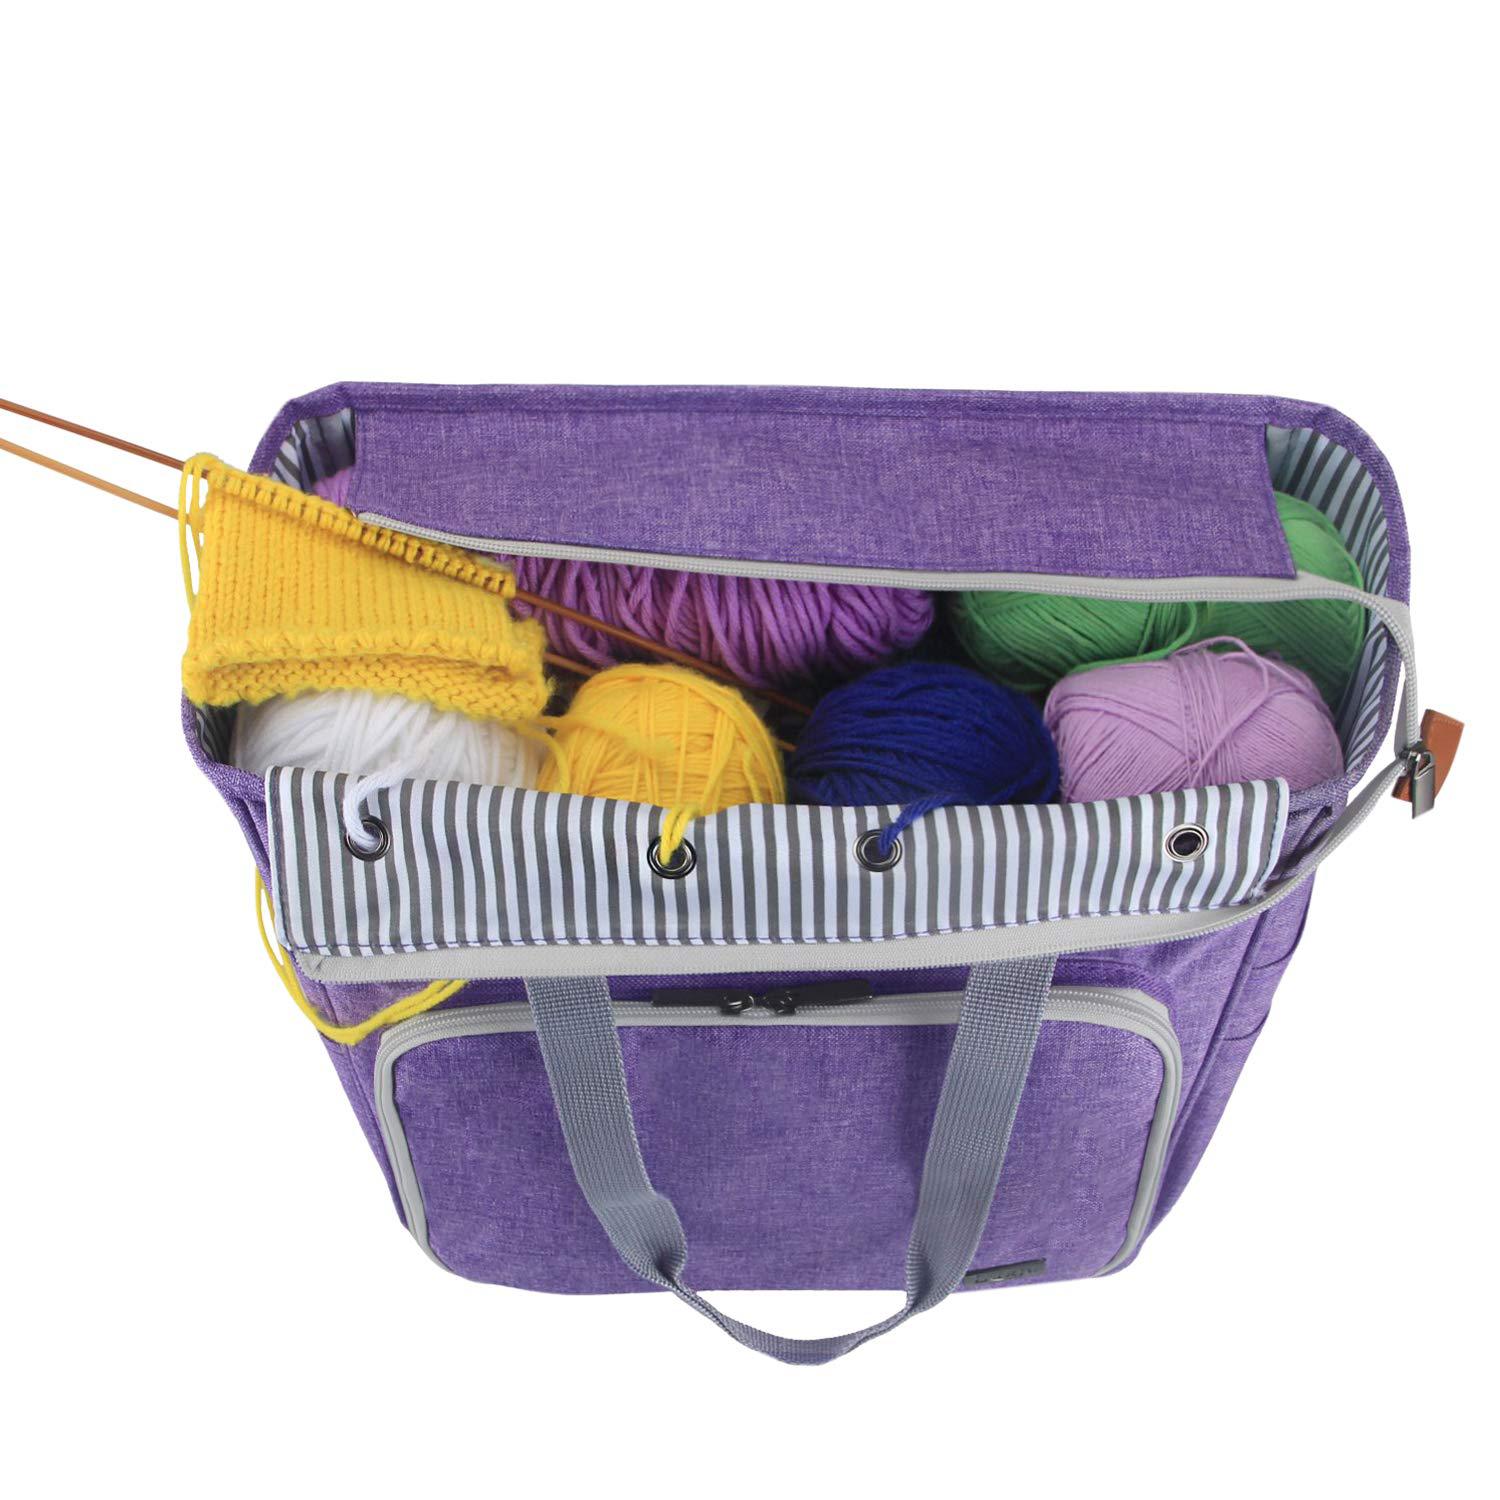 luxja knitting tote bag, yarn storage bag for carrying projects, knitting needles, crochet hooks and other accessories, purpl